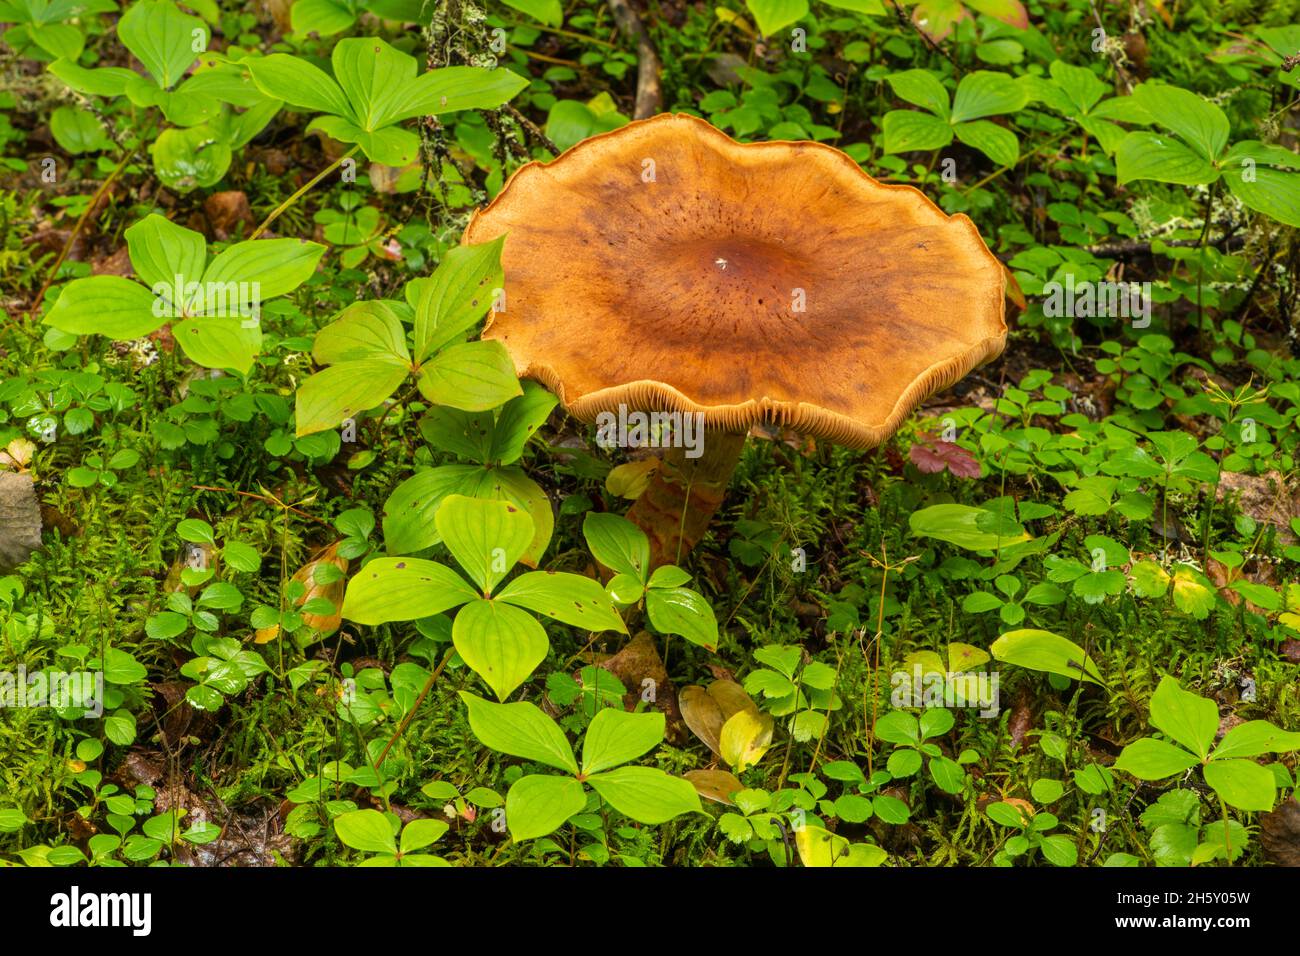 Boreal forest understory plants and fungi, Neys Provincial Park, Ontario, Canada Stock Photo